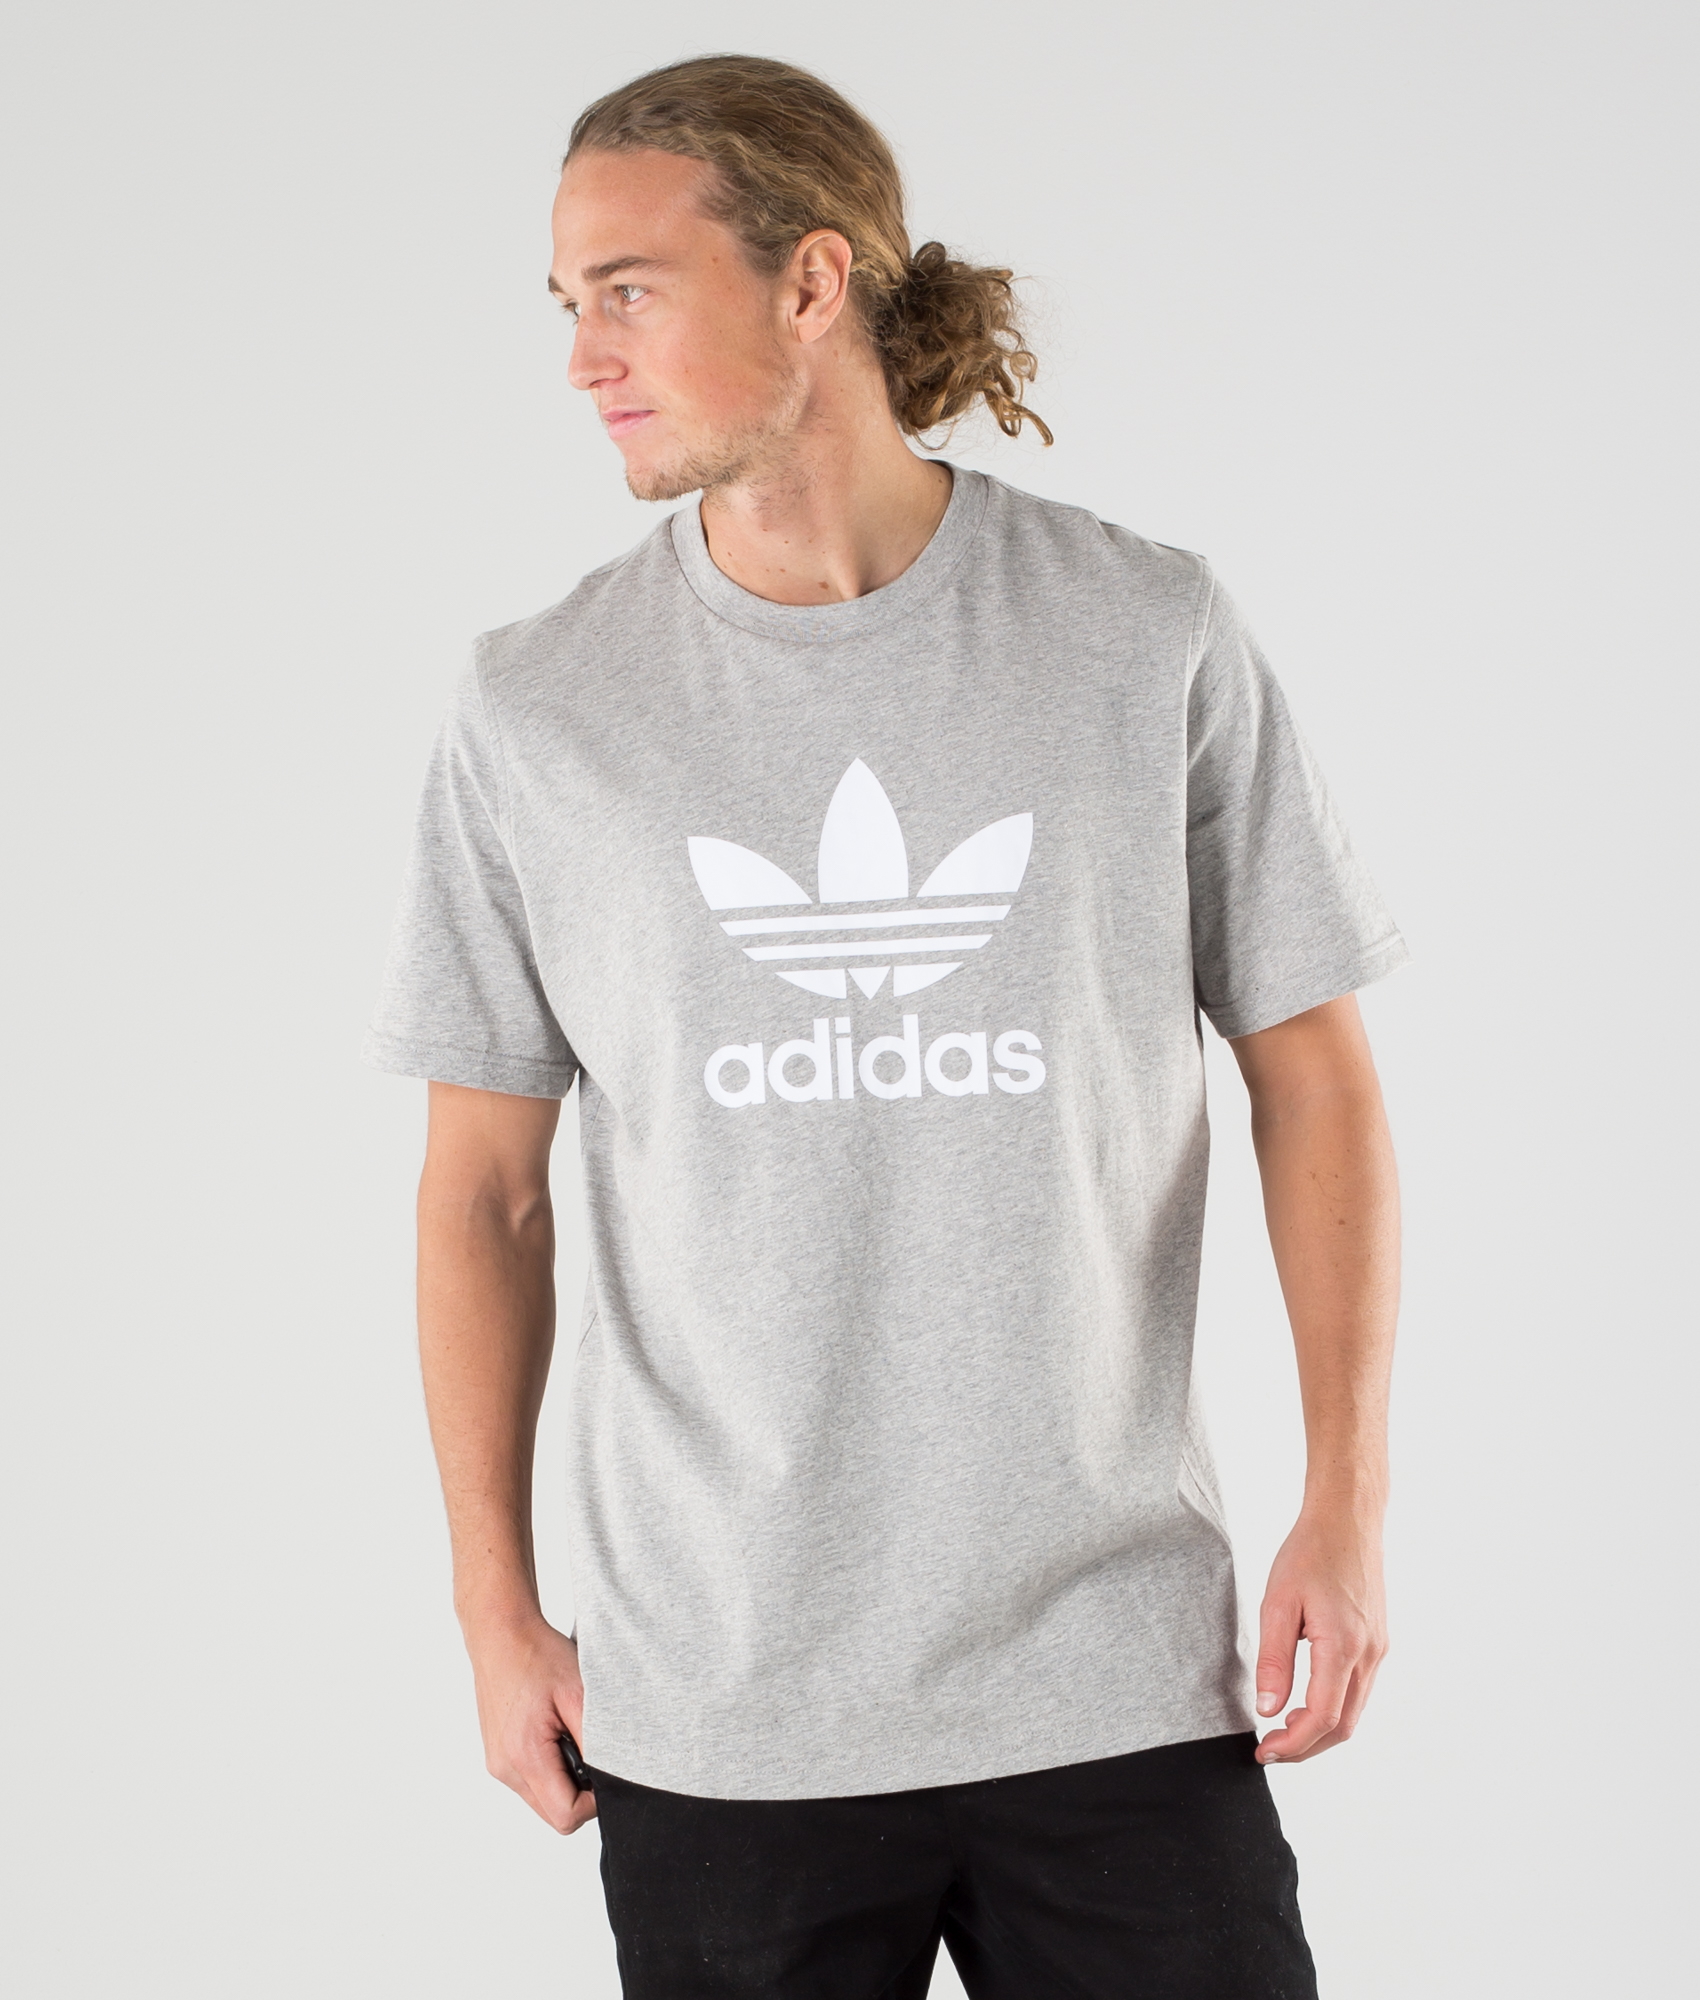 adidas soccer pants women's outfit